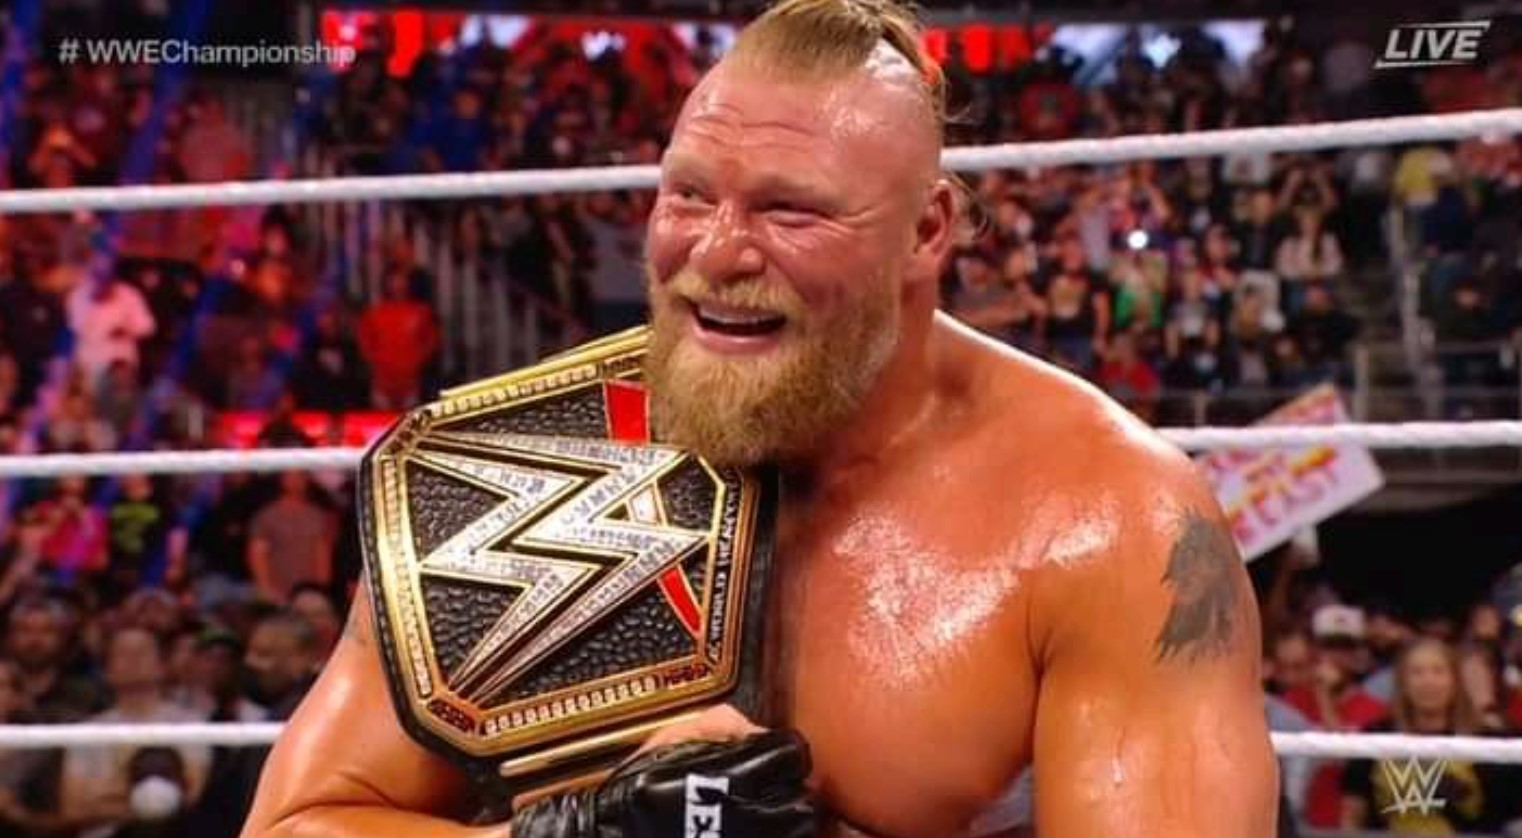 WWE Day 1 Results & Highlights: Brock Lesnar wins the fatal 5-way to become the WWE Champion. All other champions retained their titles